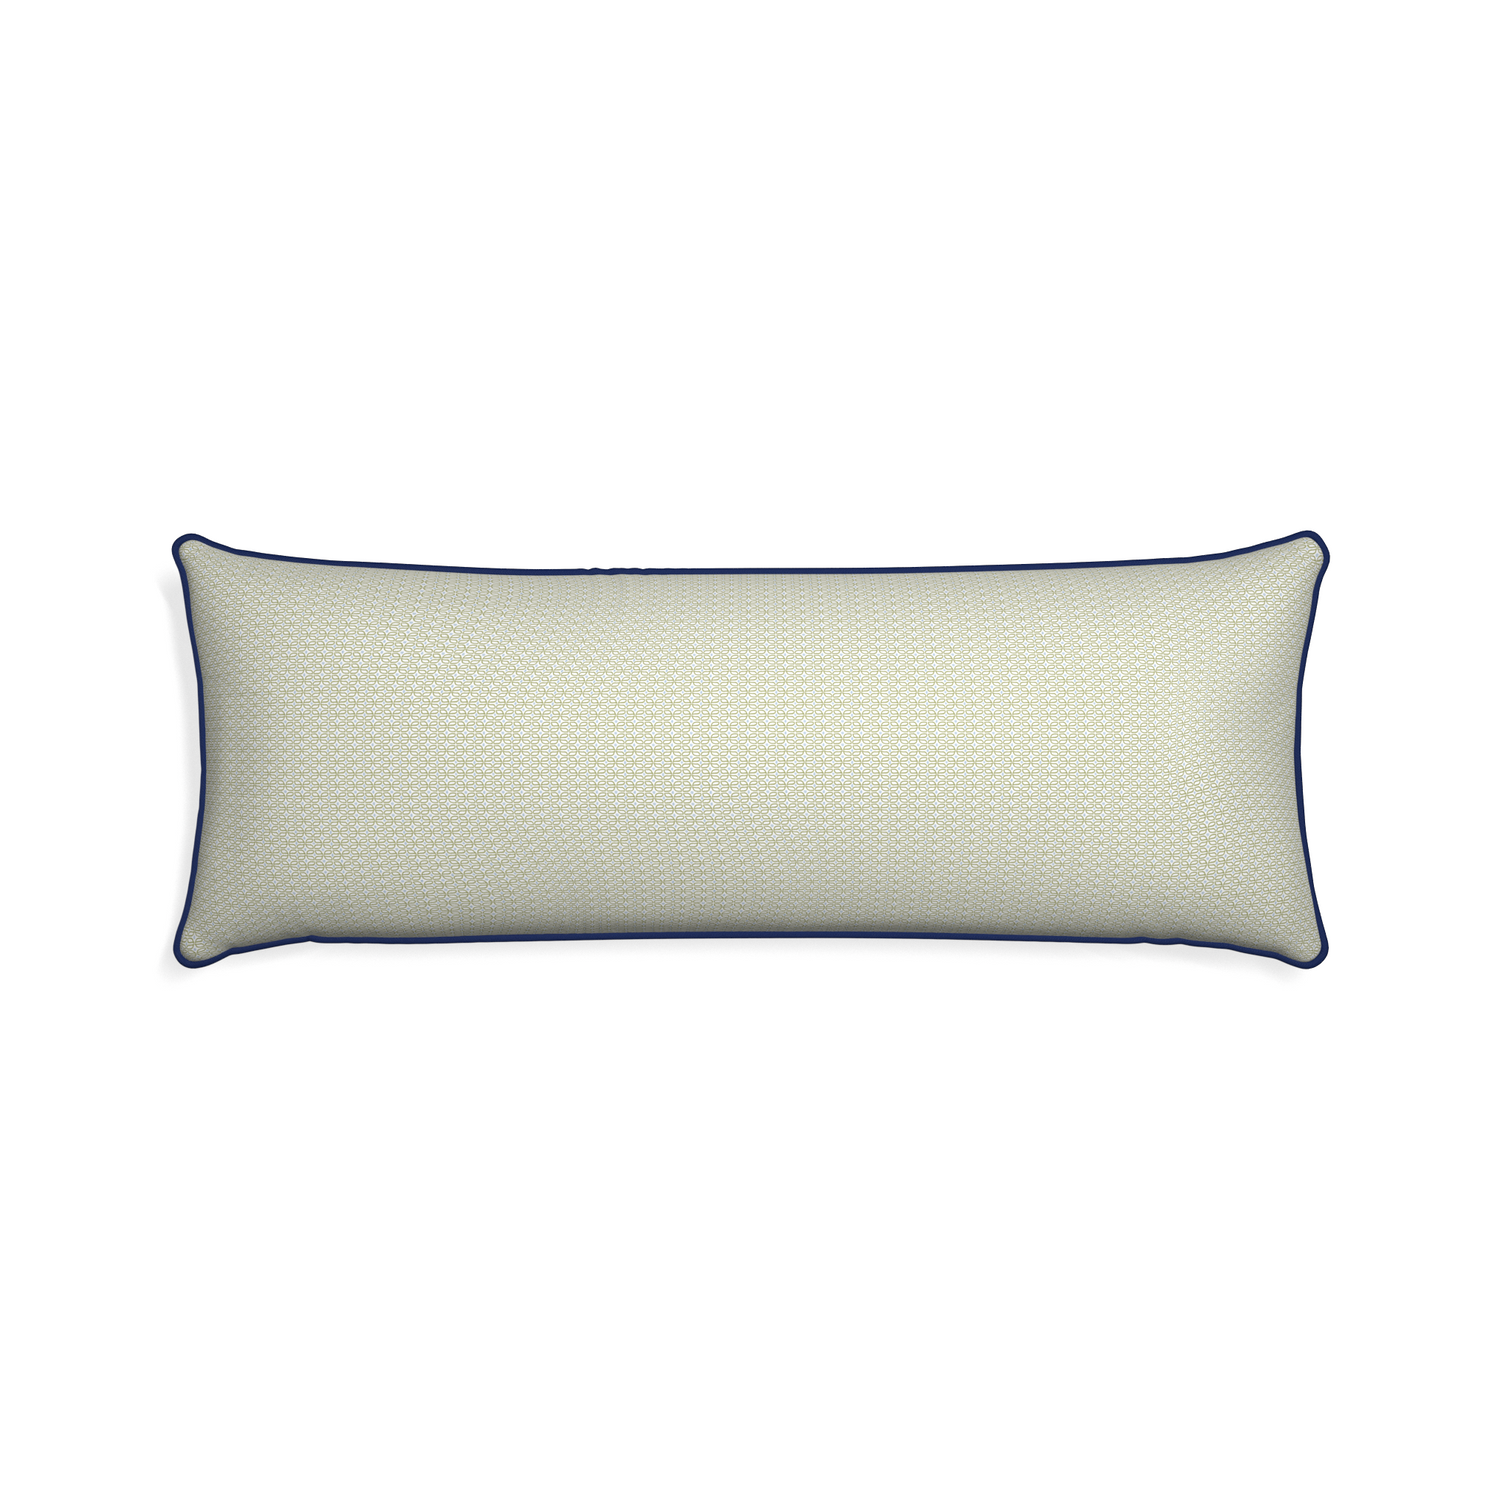 Xl-lumbar loomi moss custom moss green geometricpillow with midnight piping on white background